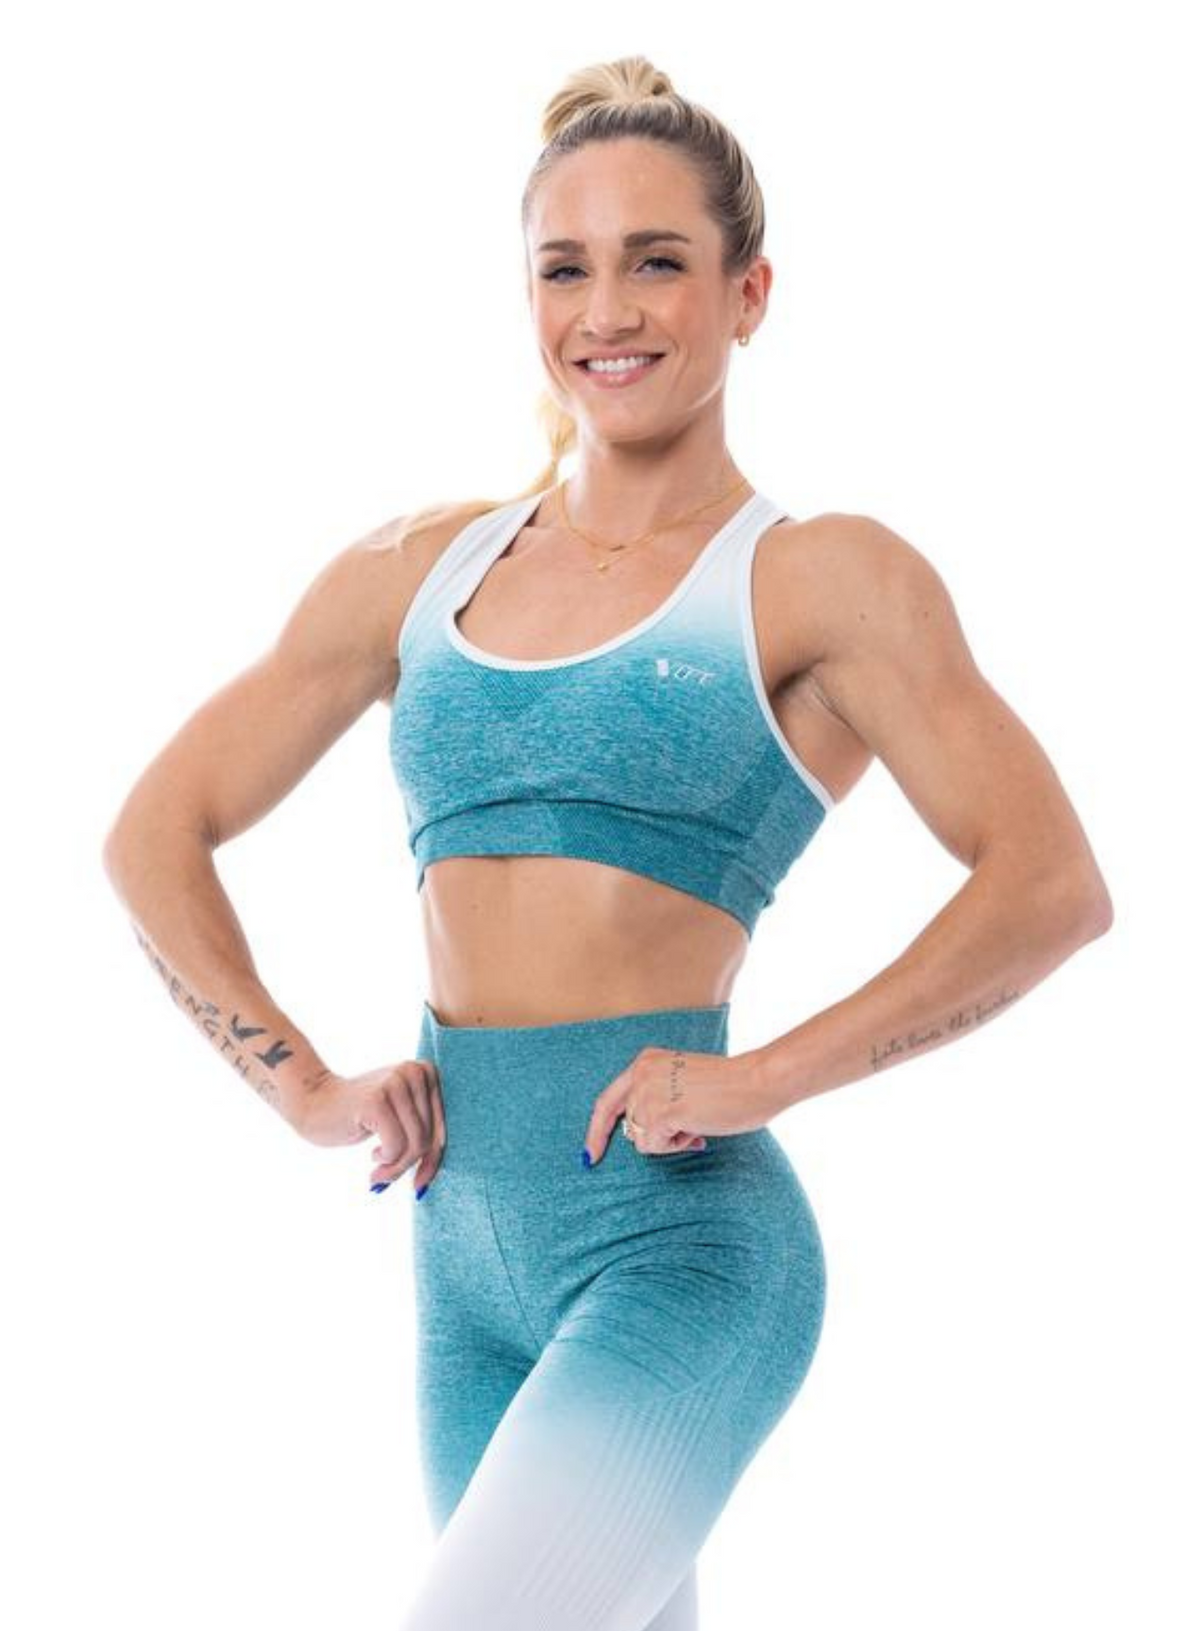 Champion turquoise small sports bra for gym, yoga - $11 - From Melinda